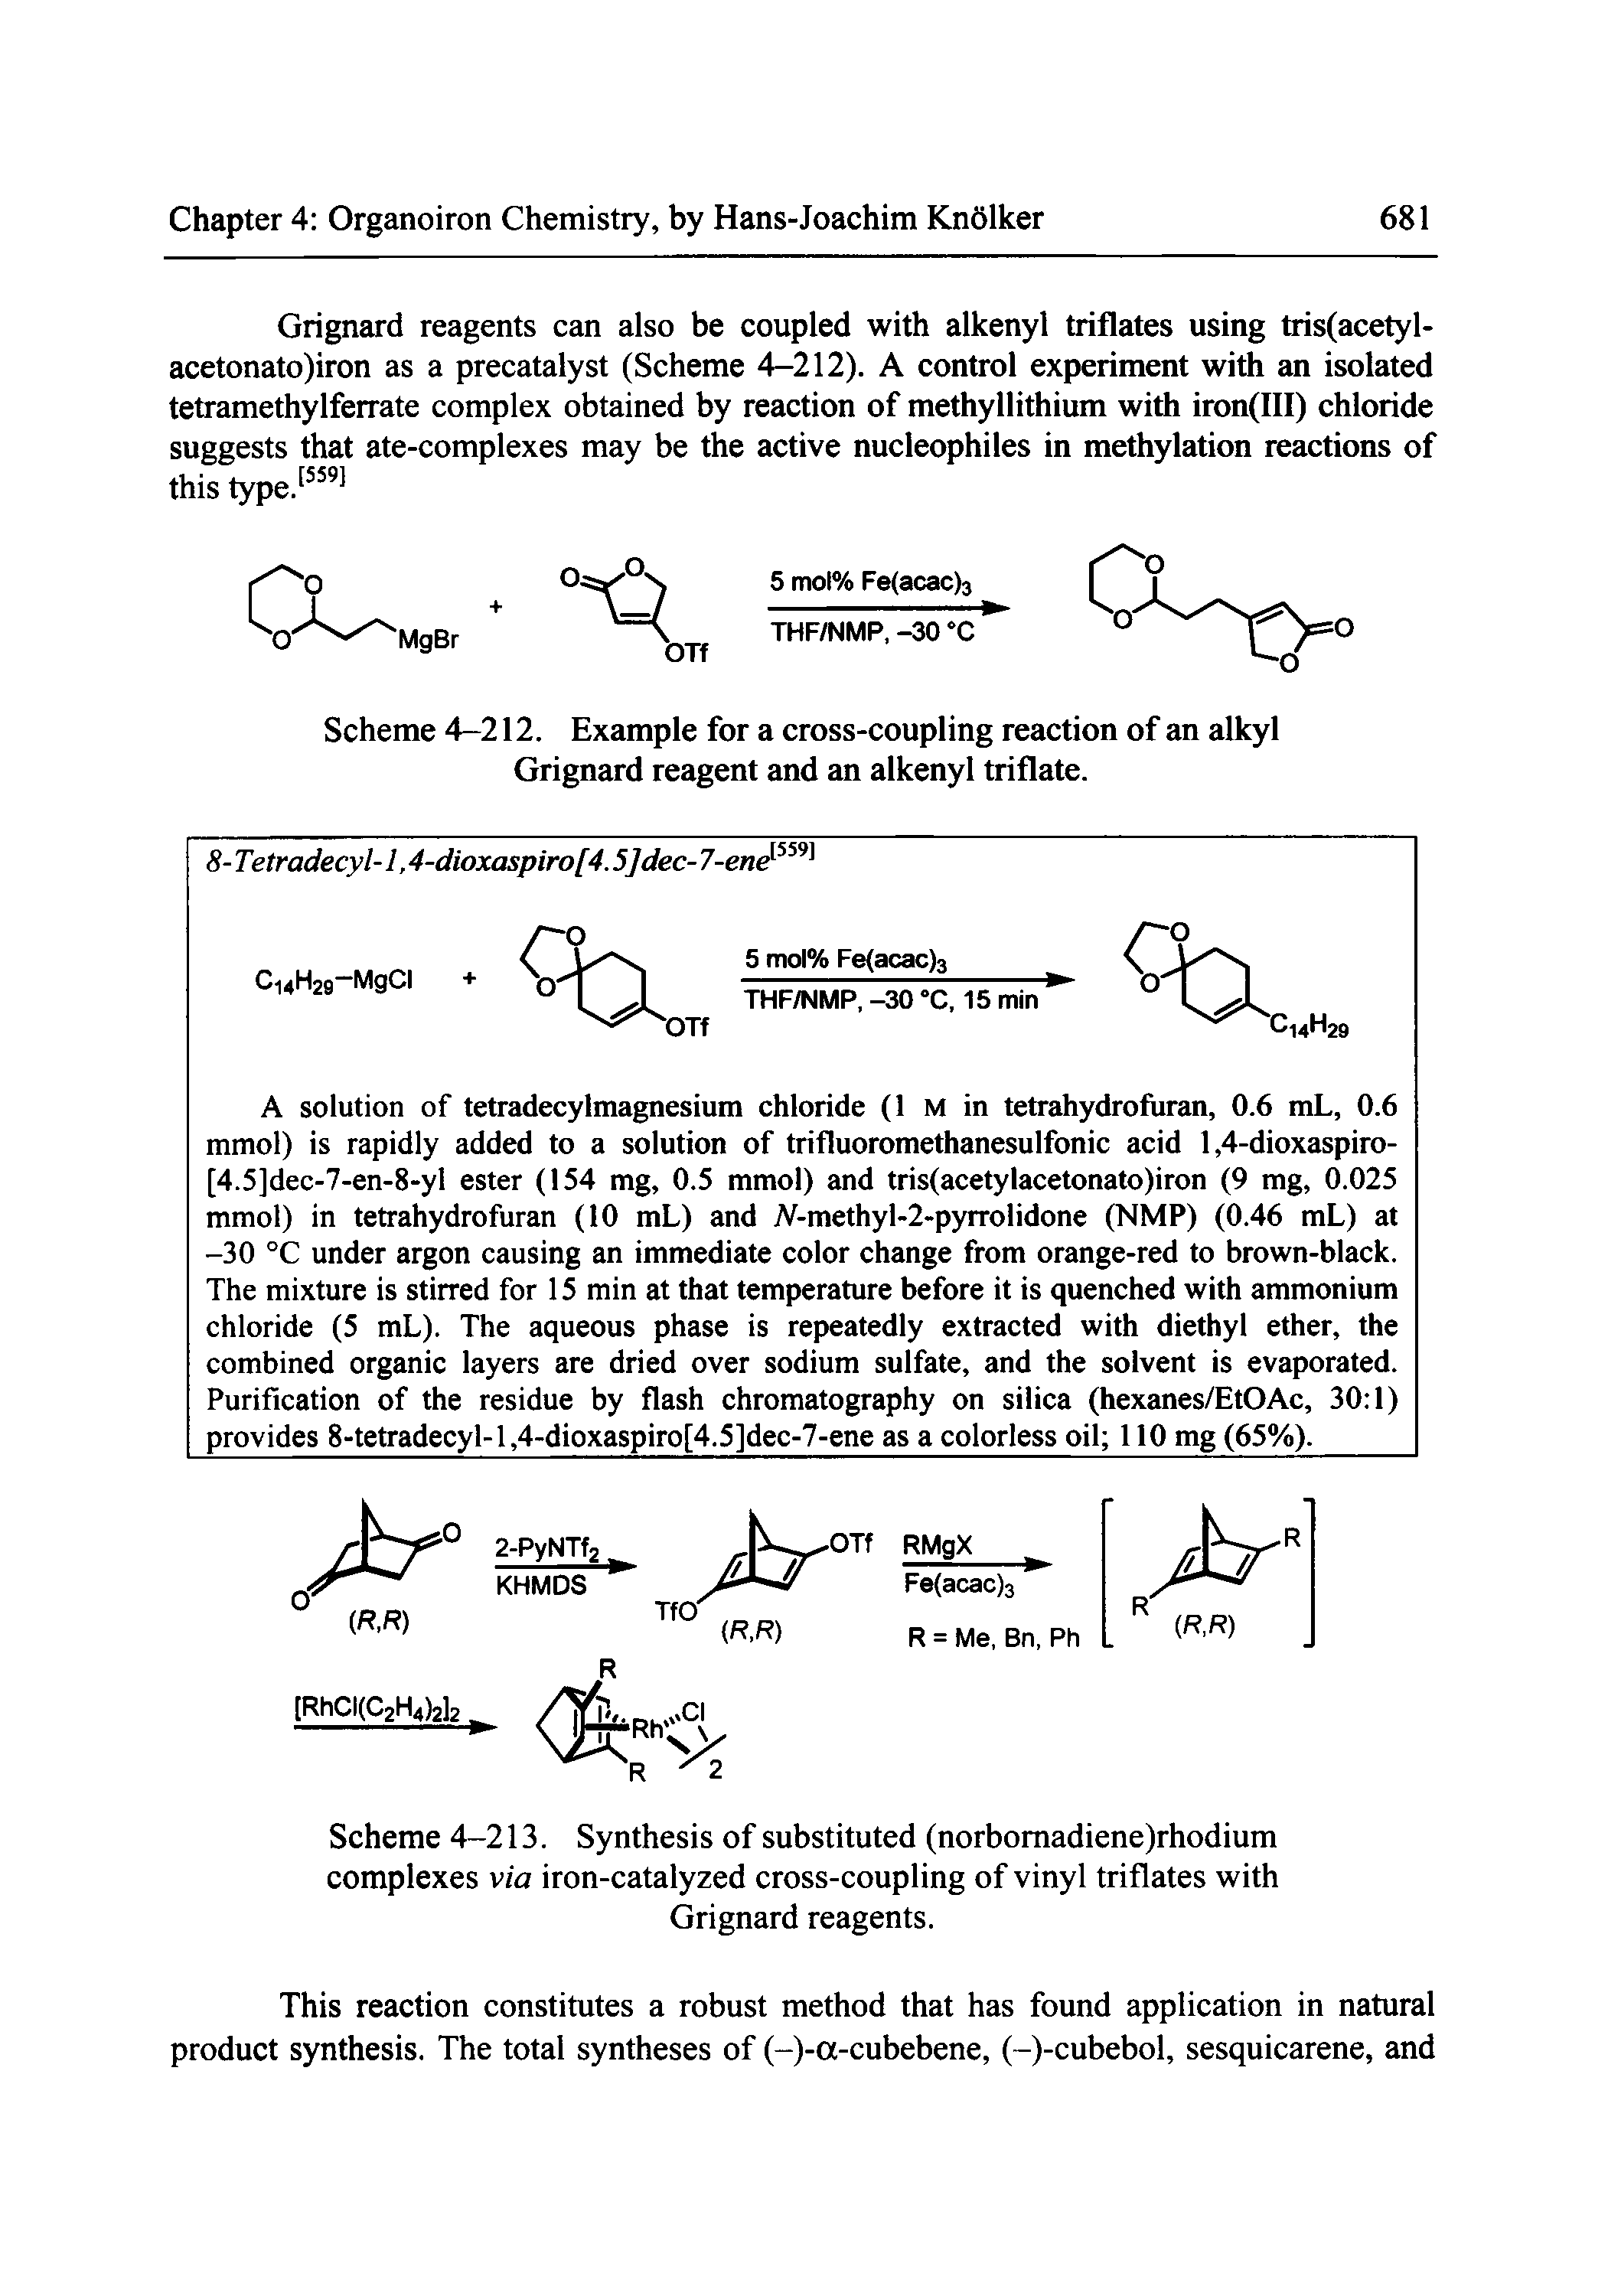 Scheme 4-213. Synthesis of substituted (norbomadiene)rhodium complexes via iron-catalyzed cross-coupling of vinyl triflates with Grignard reagents.